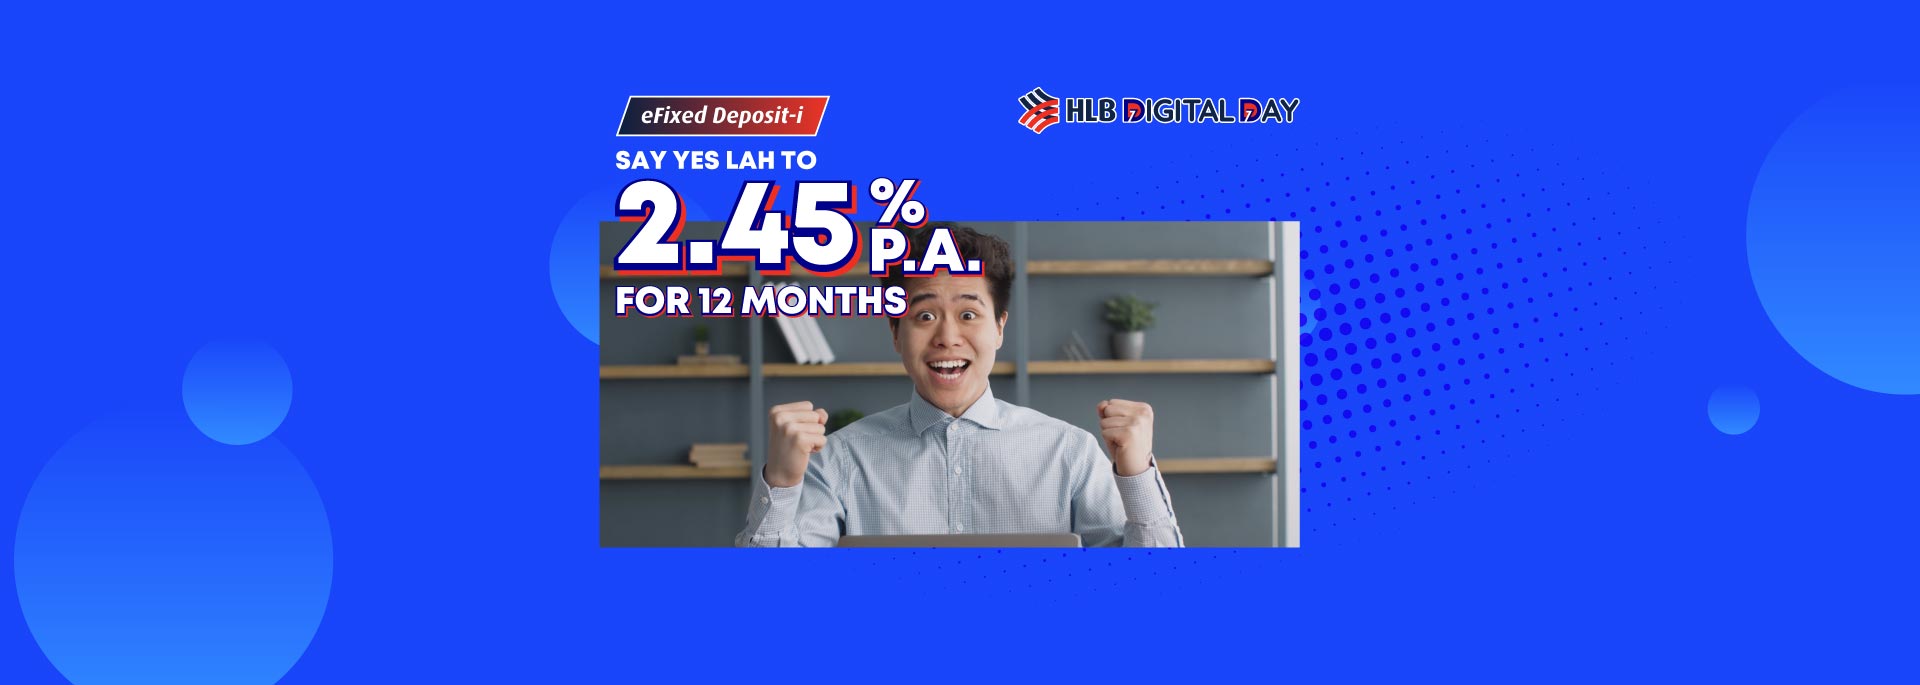 Save and grow your money with 2.45% p.a. for 12 months eFixed Deposit-I placements via HLB Connect